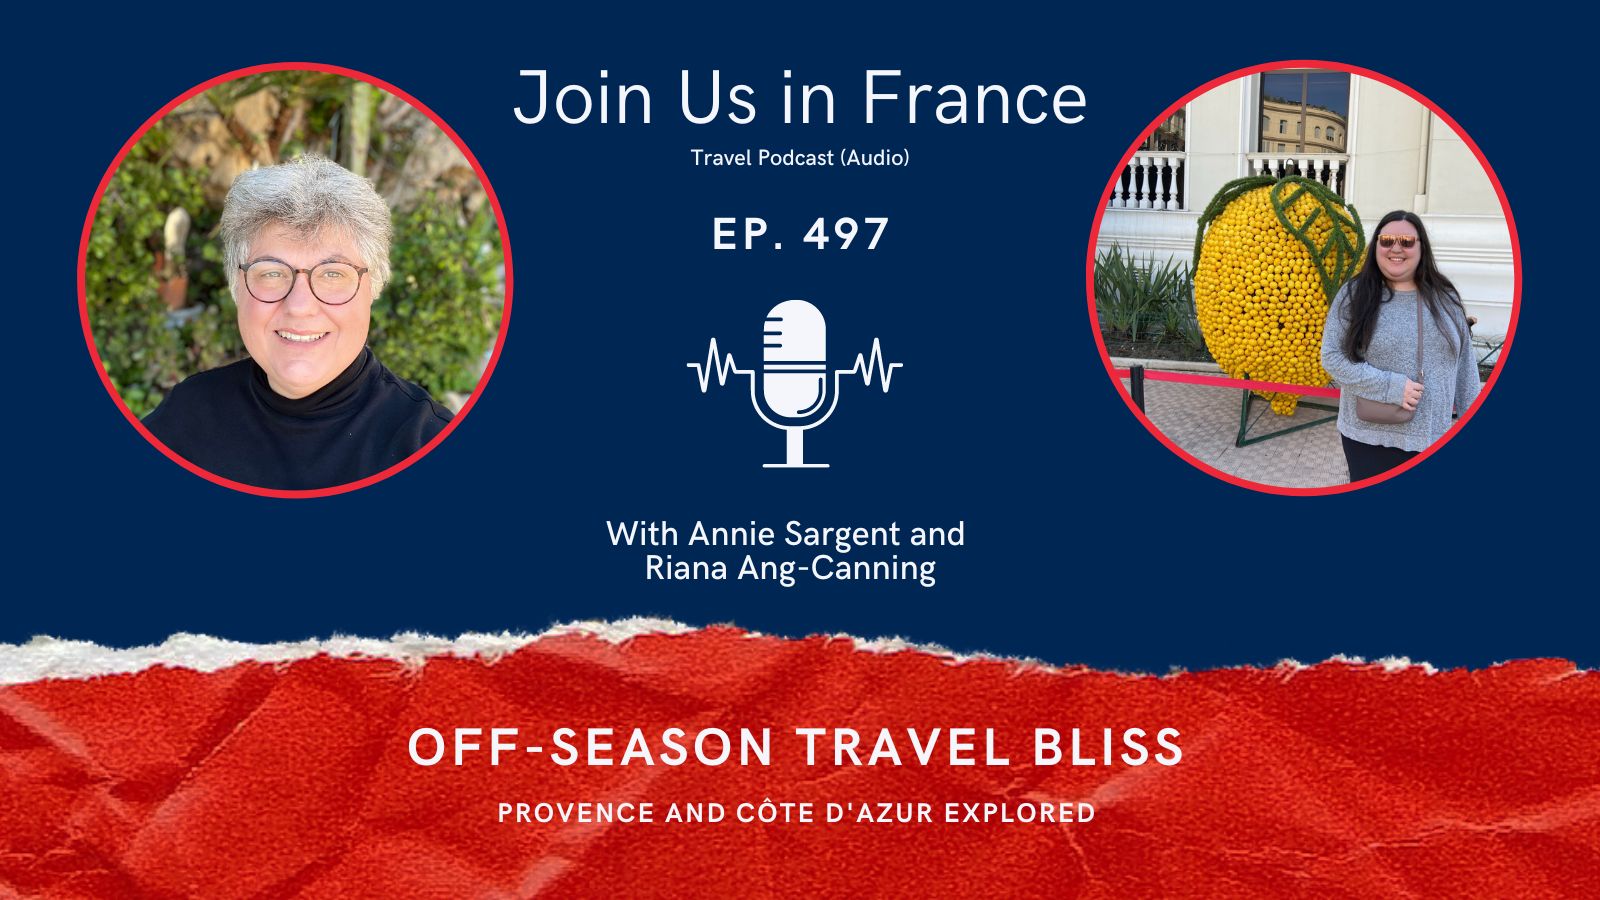 Annie Sargent and Riana Ang-Canning: Off-Season Travel Bliss Episode